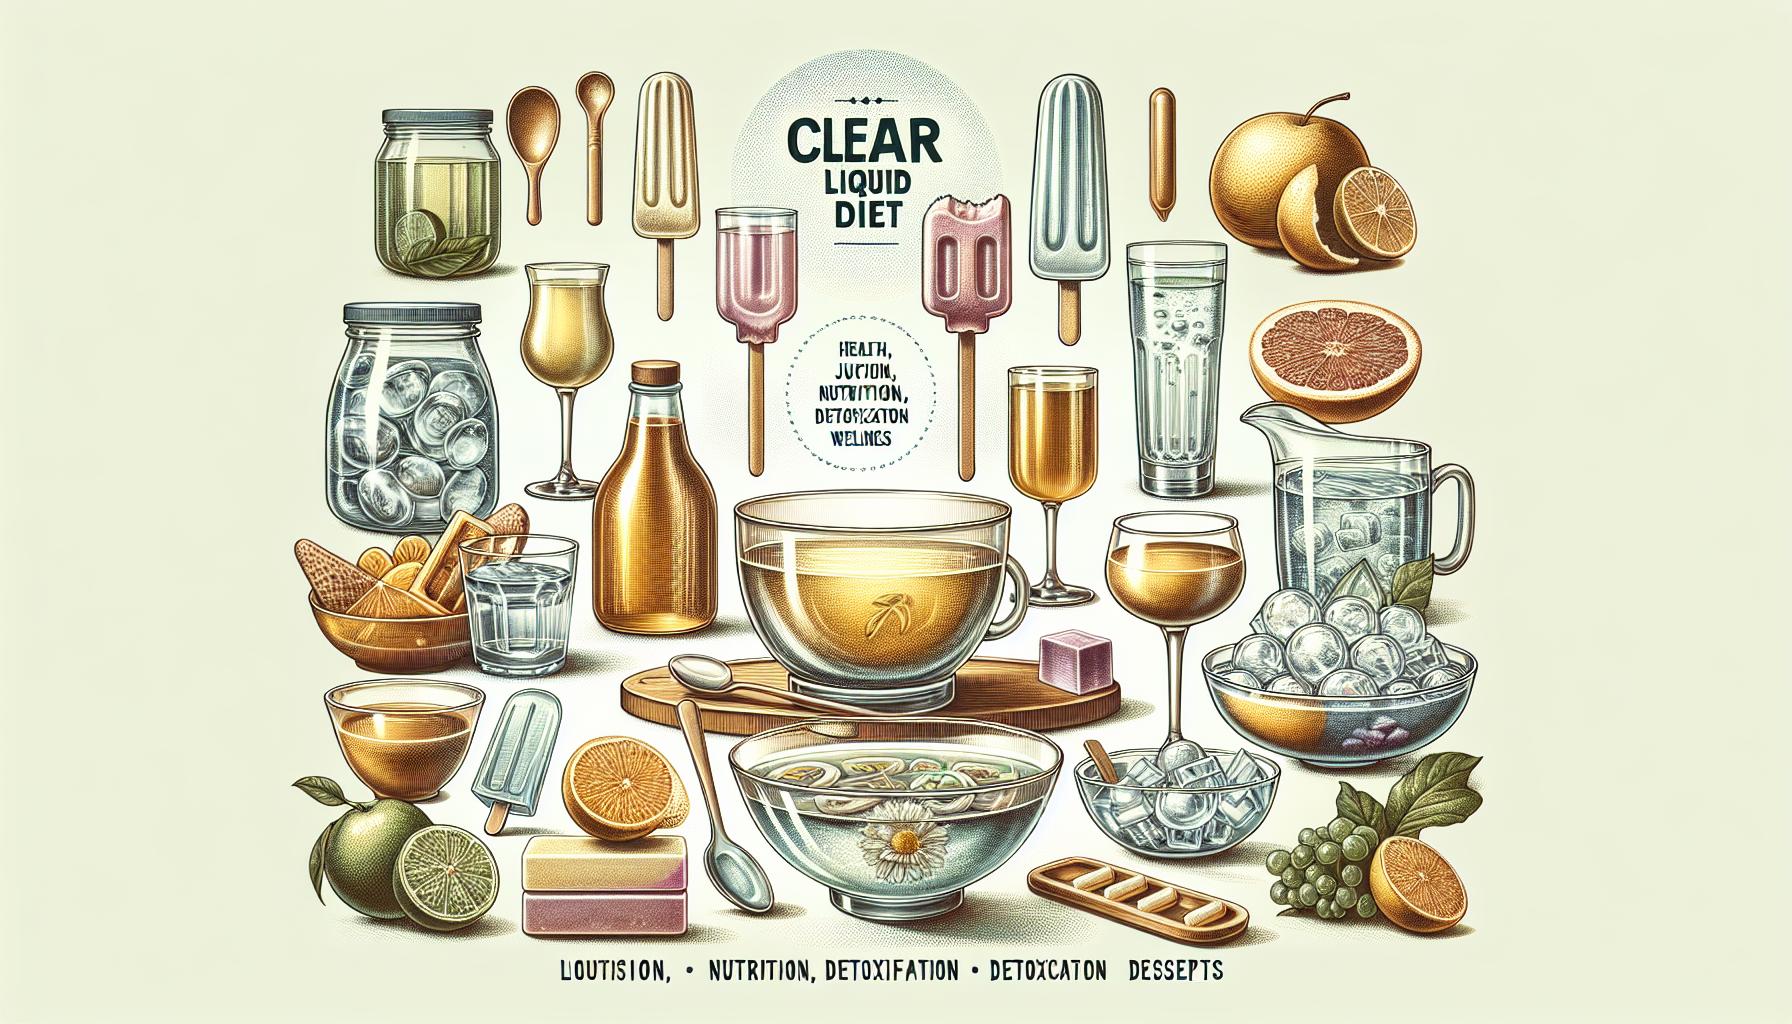 Which Of These Foods Are Permitted On A Clear Liquid Diet?